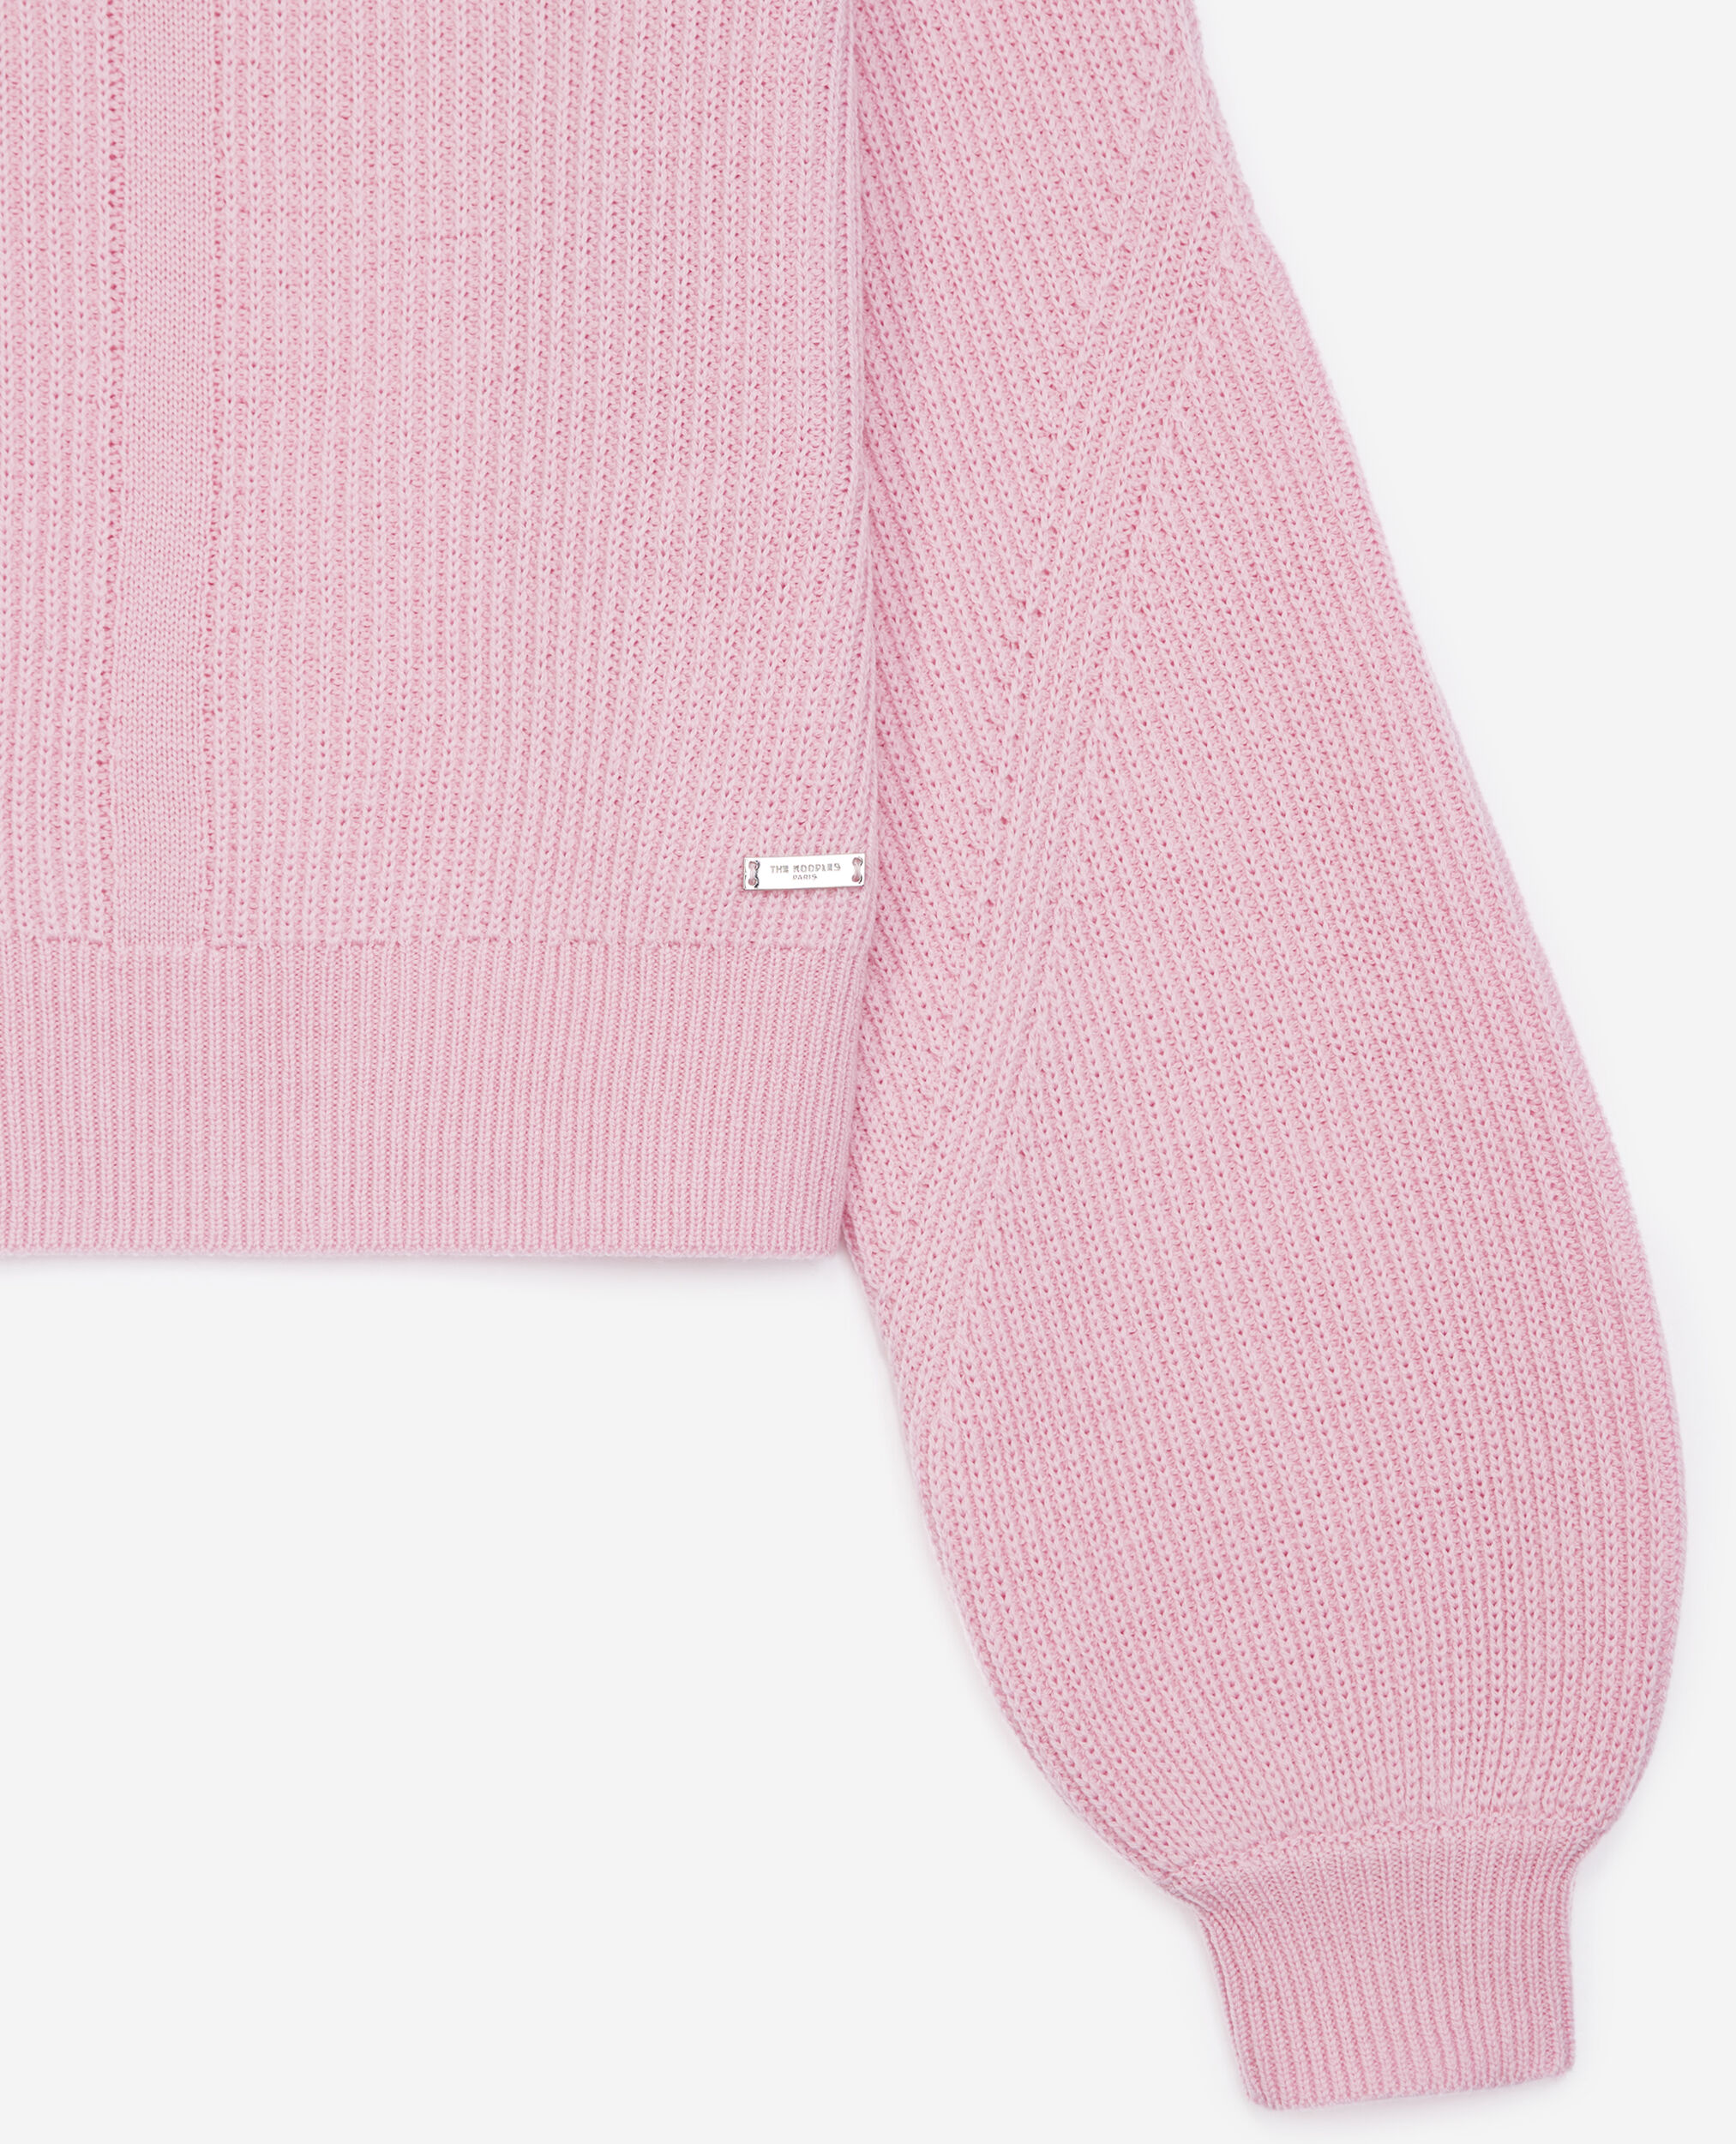 Wollpullover Merinowolle hellrosa weit, PINK, hi-res image number null